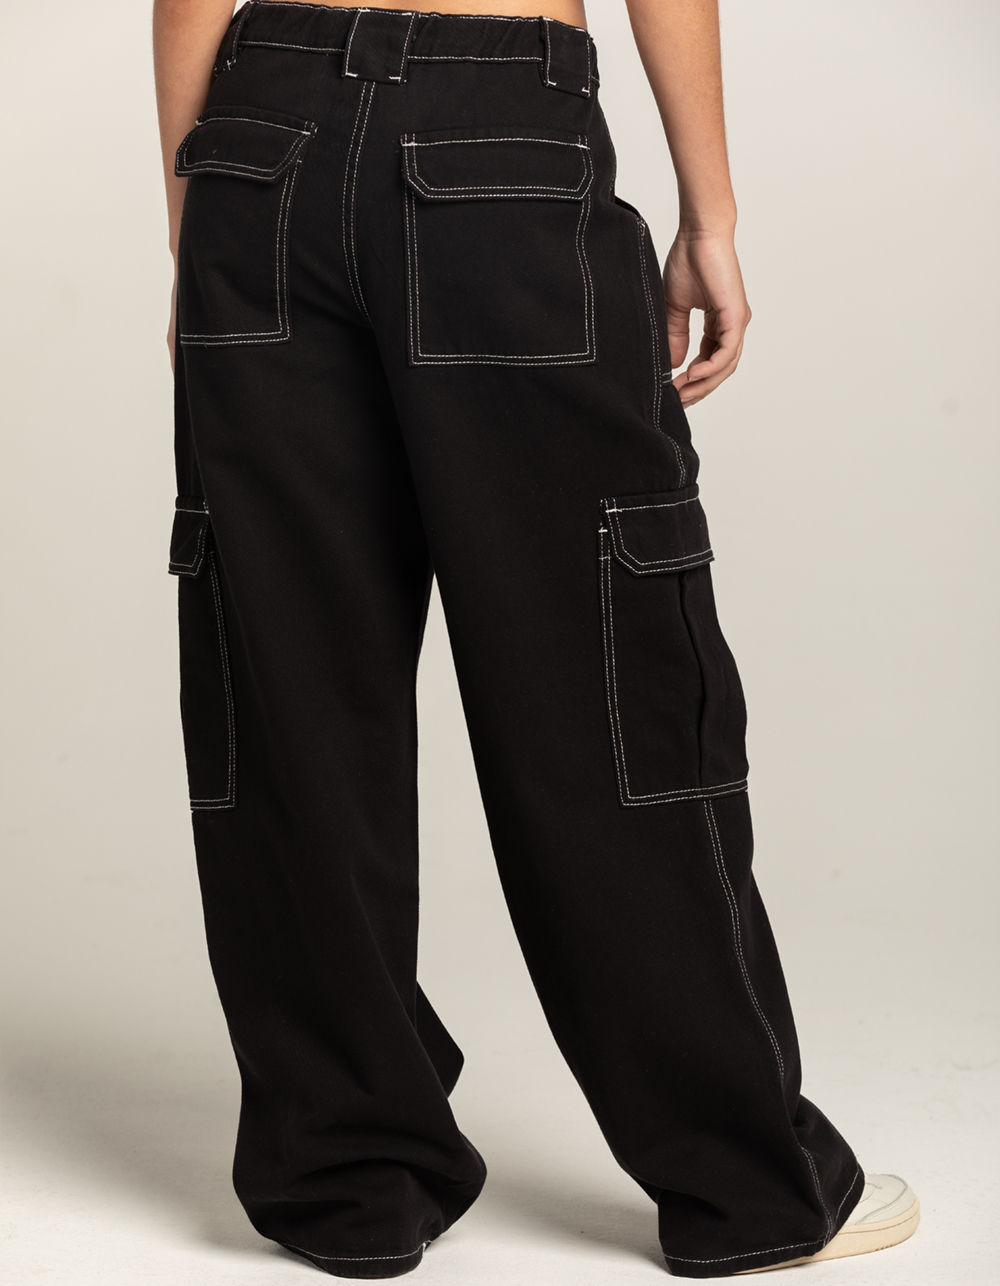 RSQ Womens Baggy Cargo Pants - BLACK | Tillys